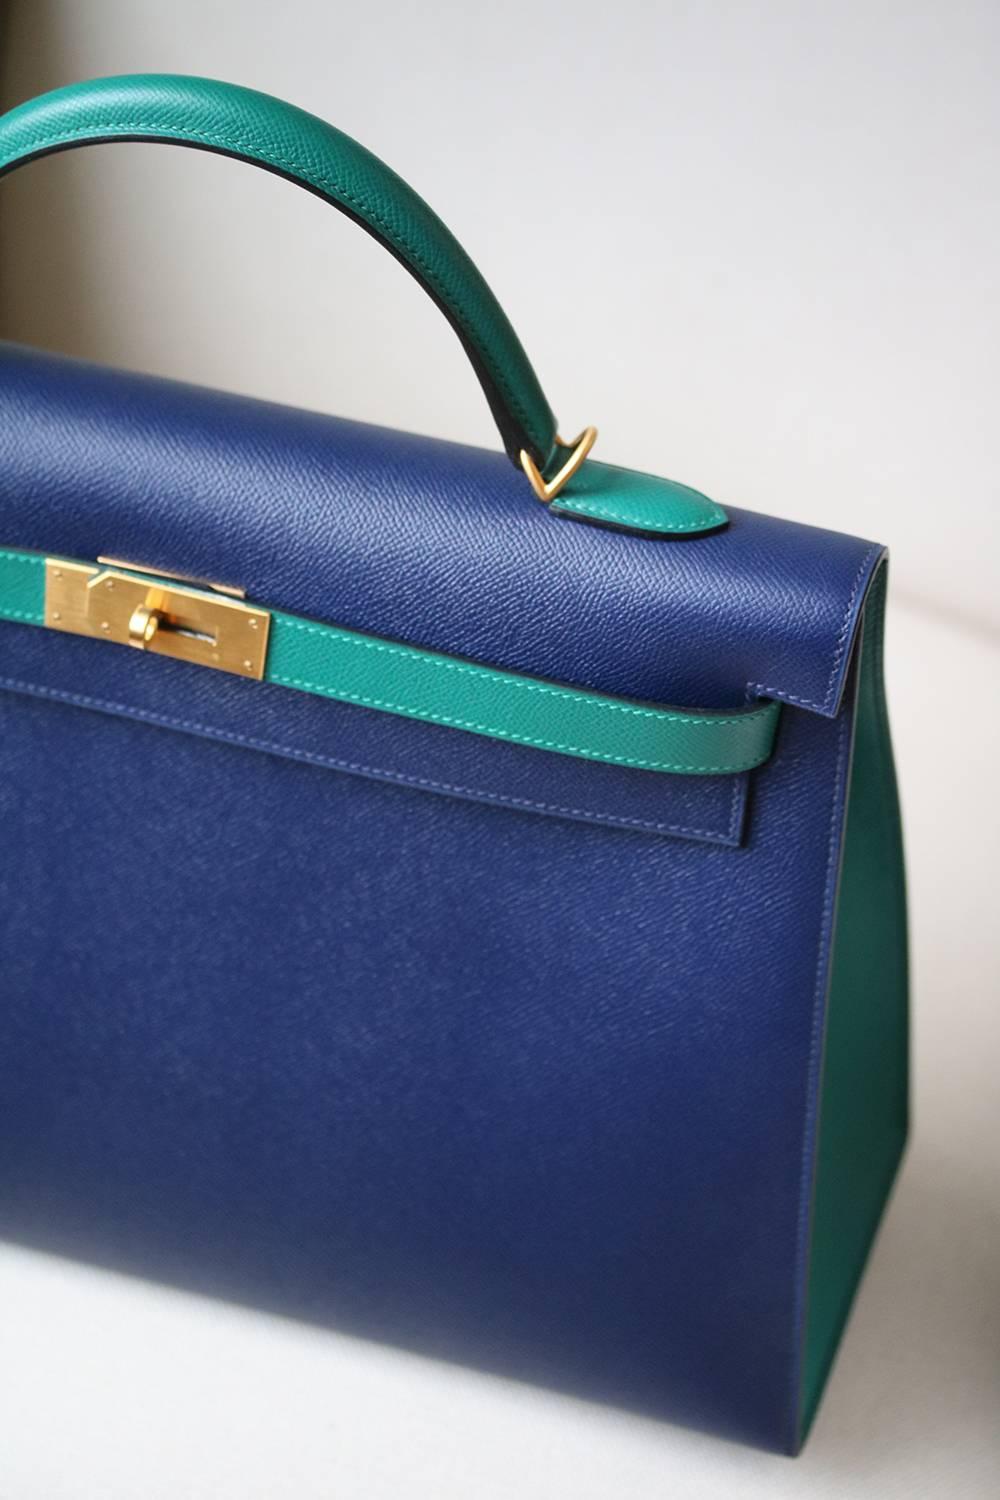 Hermès 40cm Bi-colour Kelly in bi-colour green and blue with brushed gold hardware. Luxuriously rich Hermès blue and green colour with tonal top stitching.

Year: Date stamp is a T in a square - 2015 production.

Condition: This bag is brand-new,